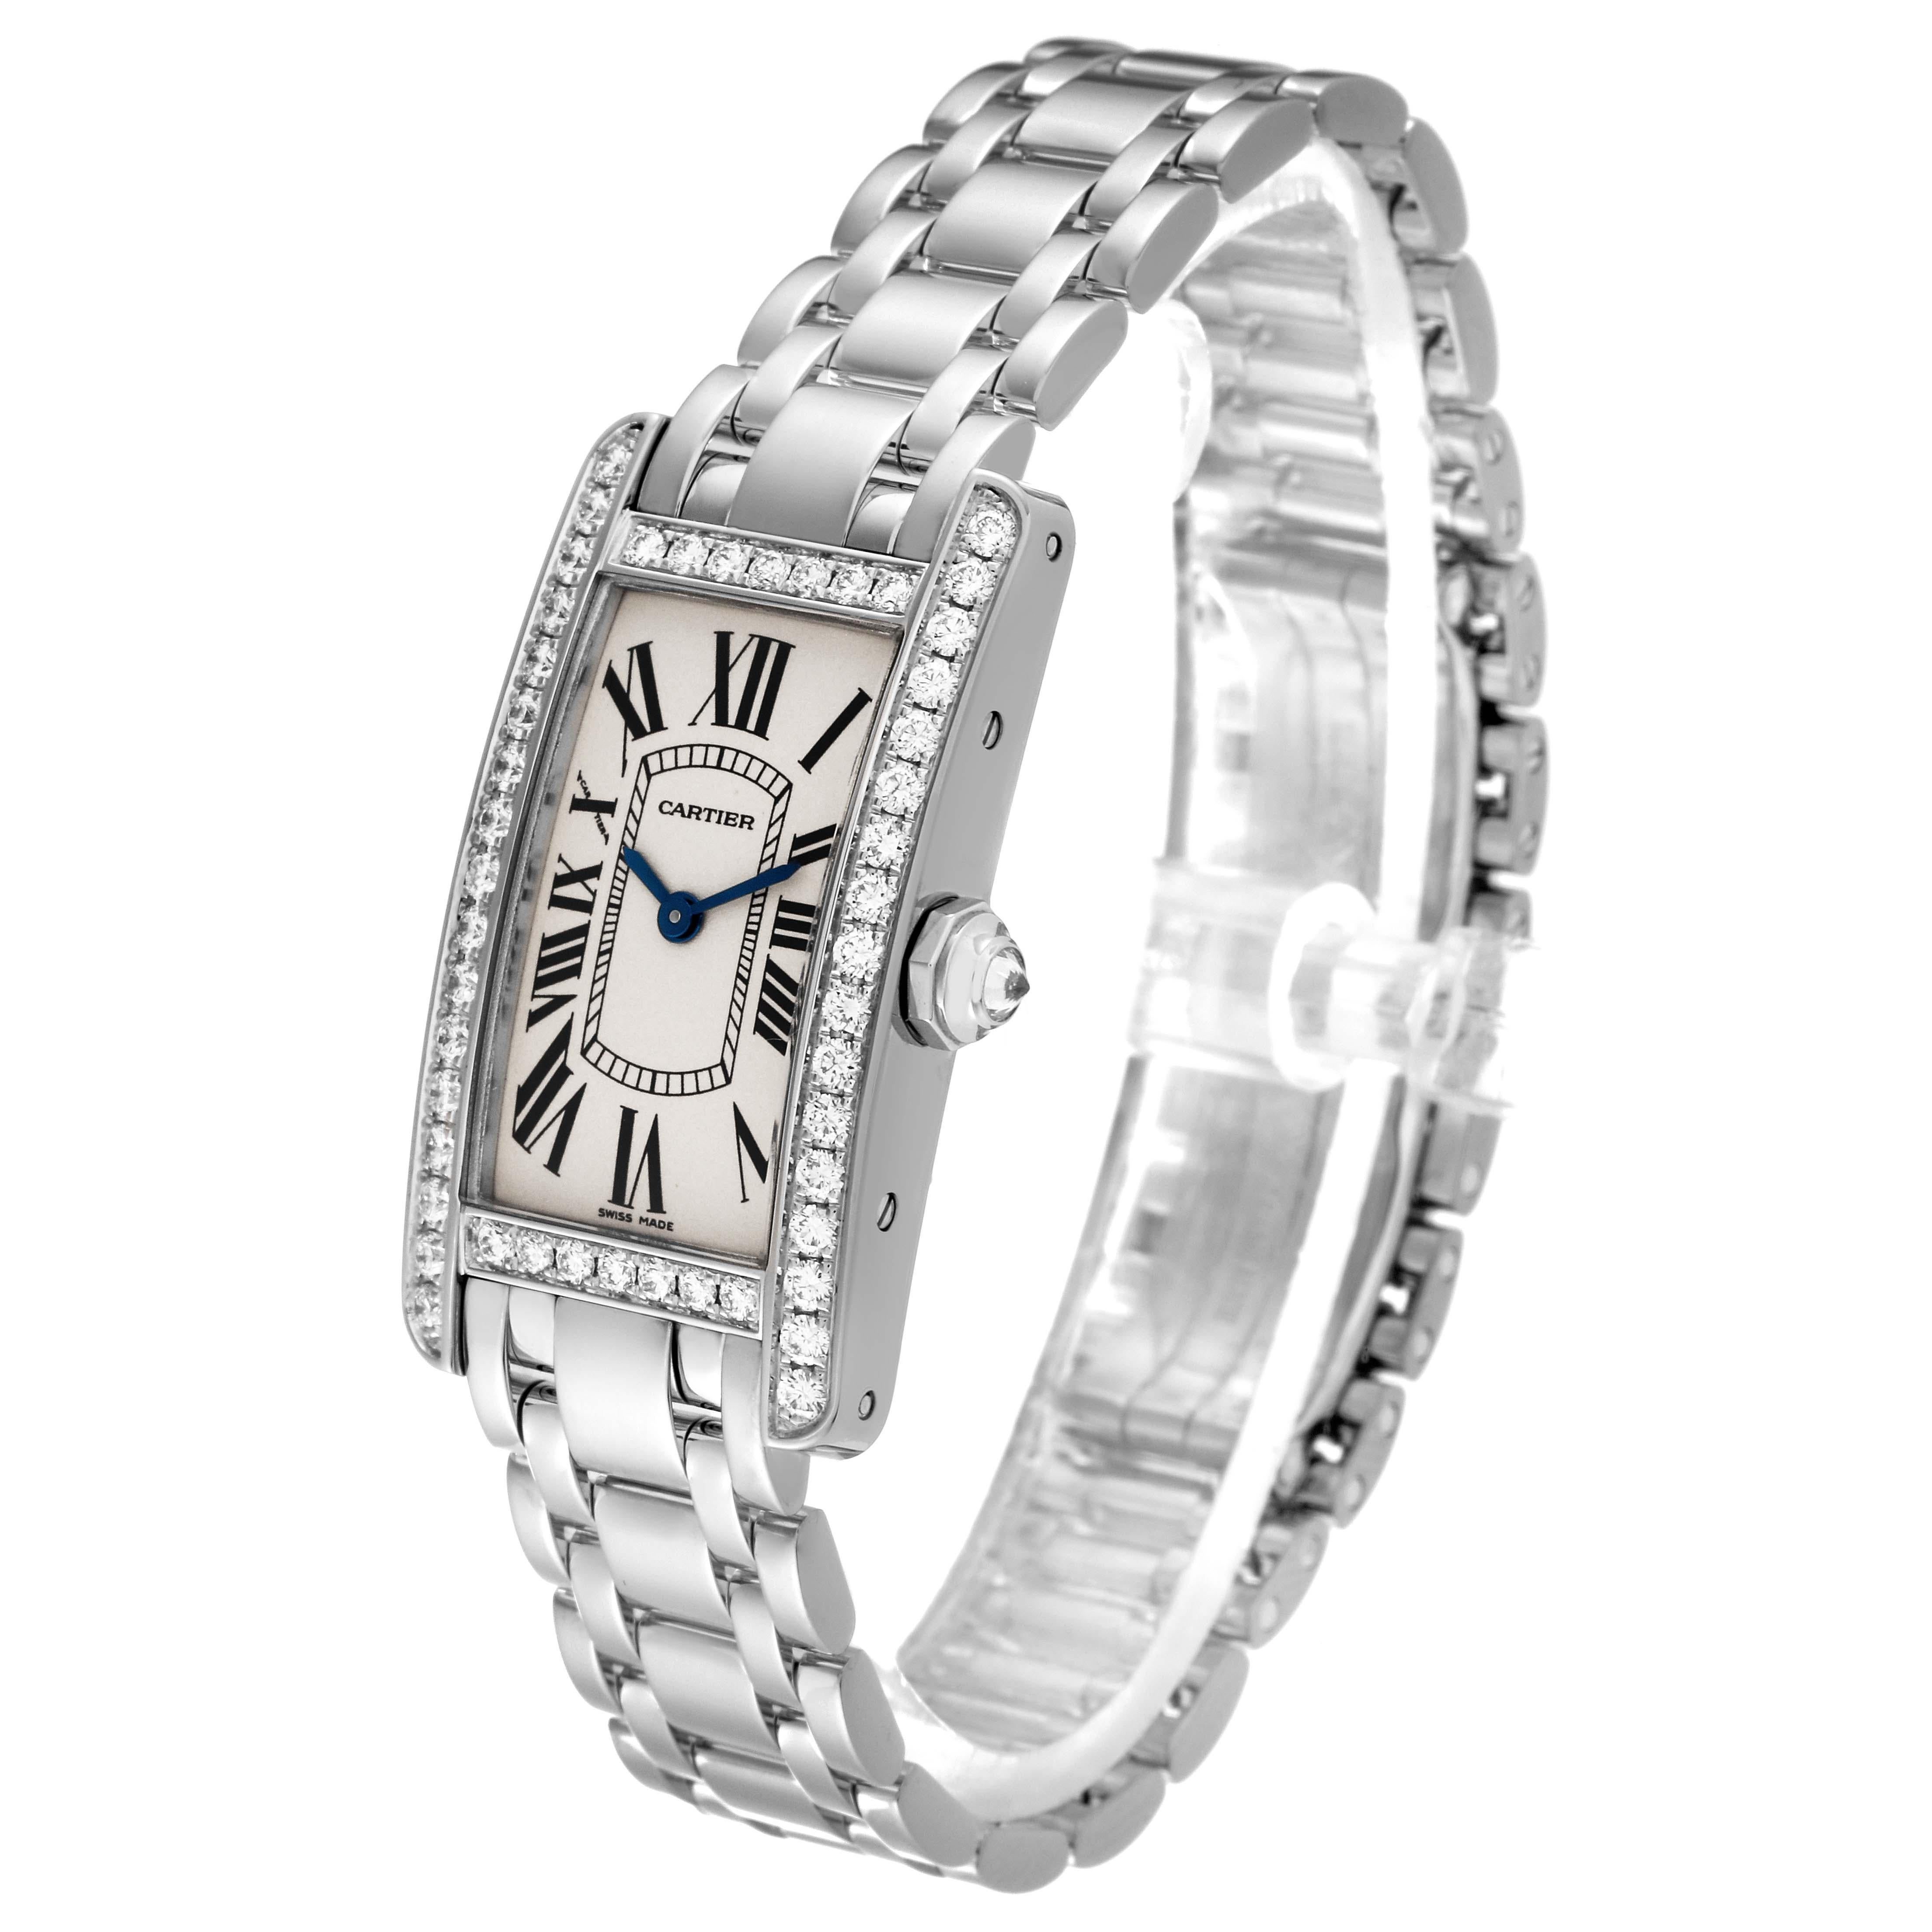 Cartier Tank Americaine White Gold Diamond Ladies Watch WB7073L1 Box Papers 6